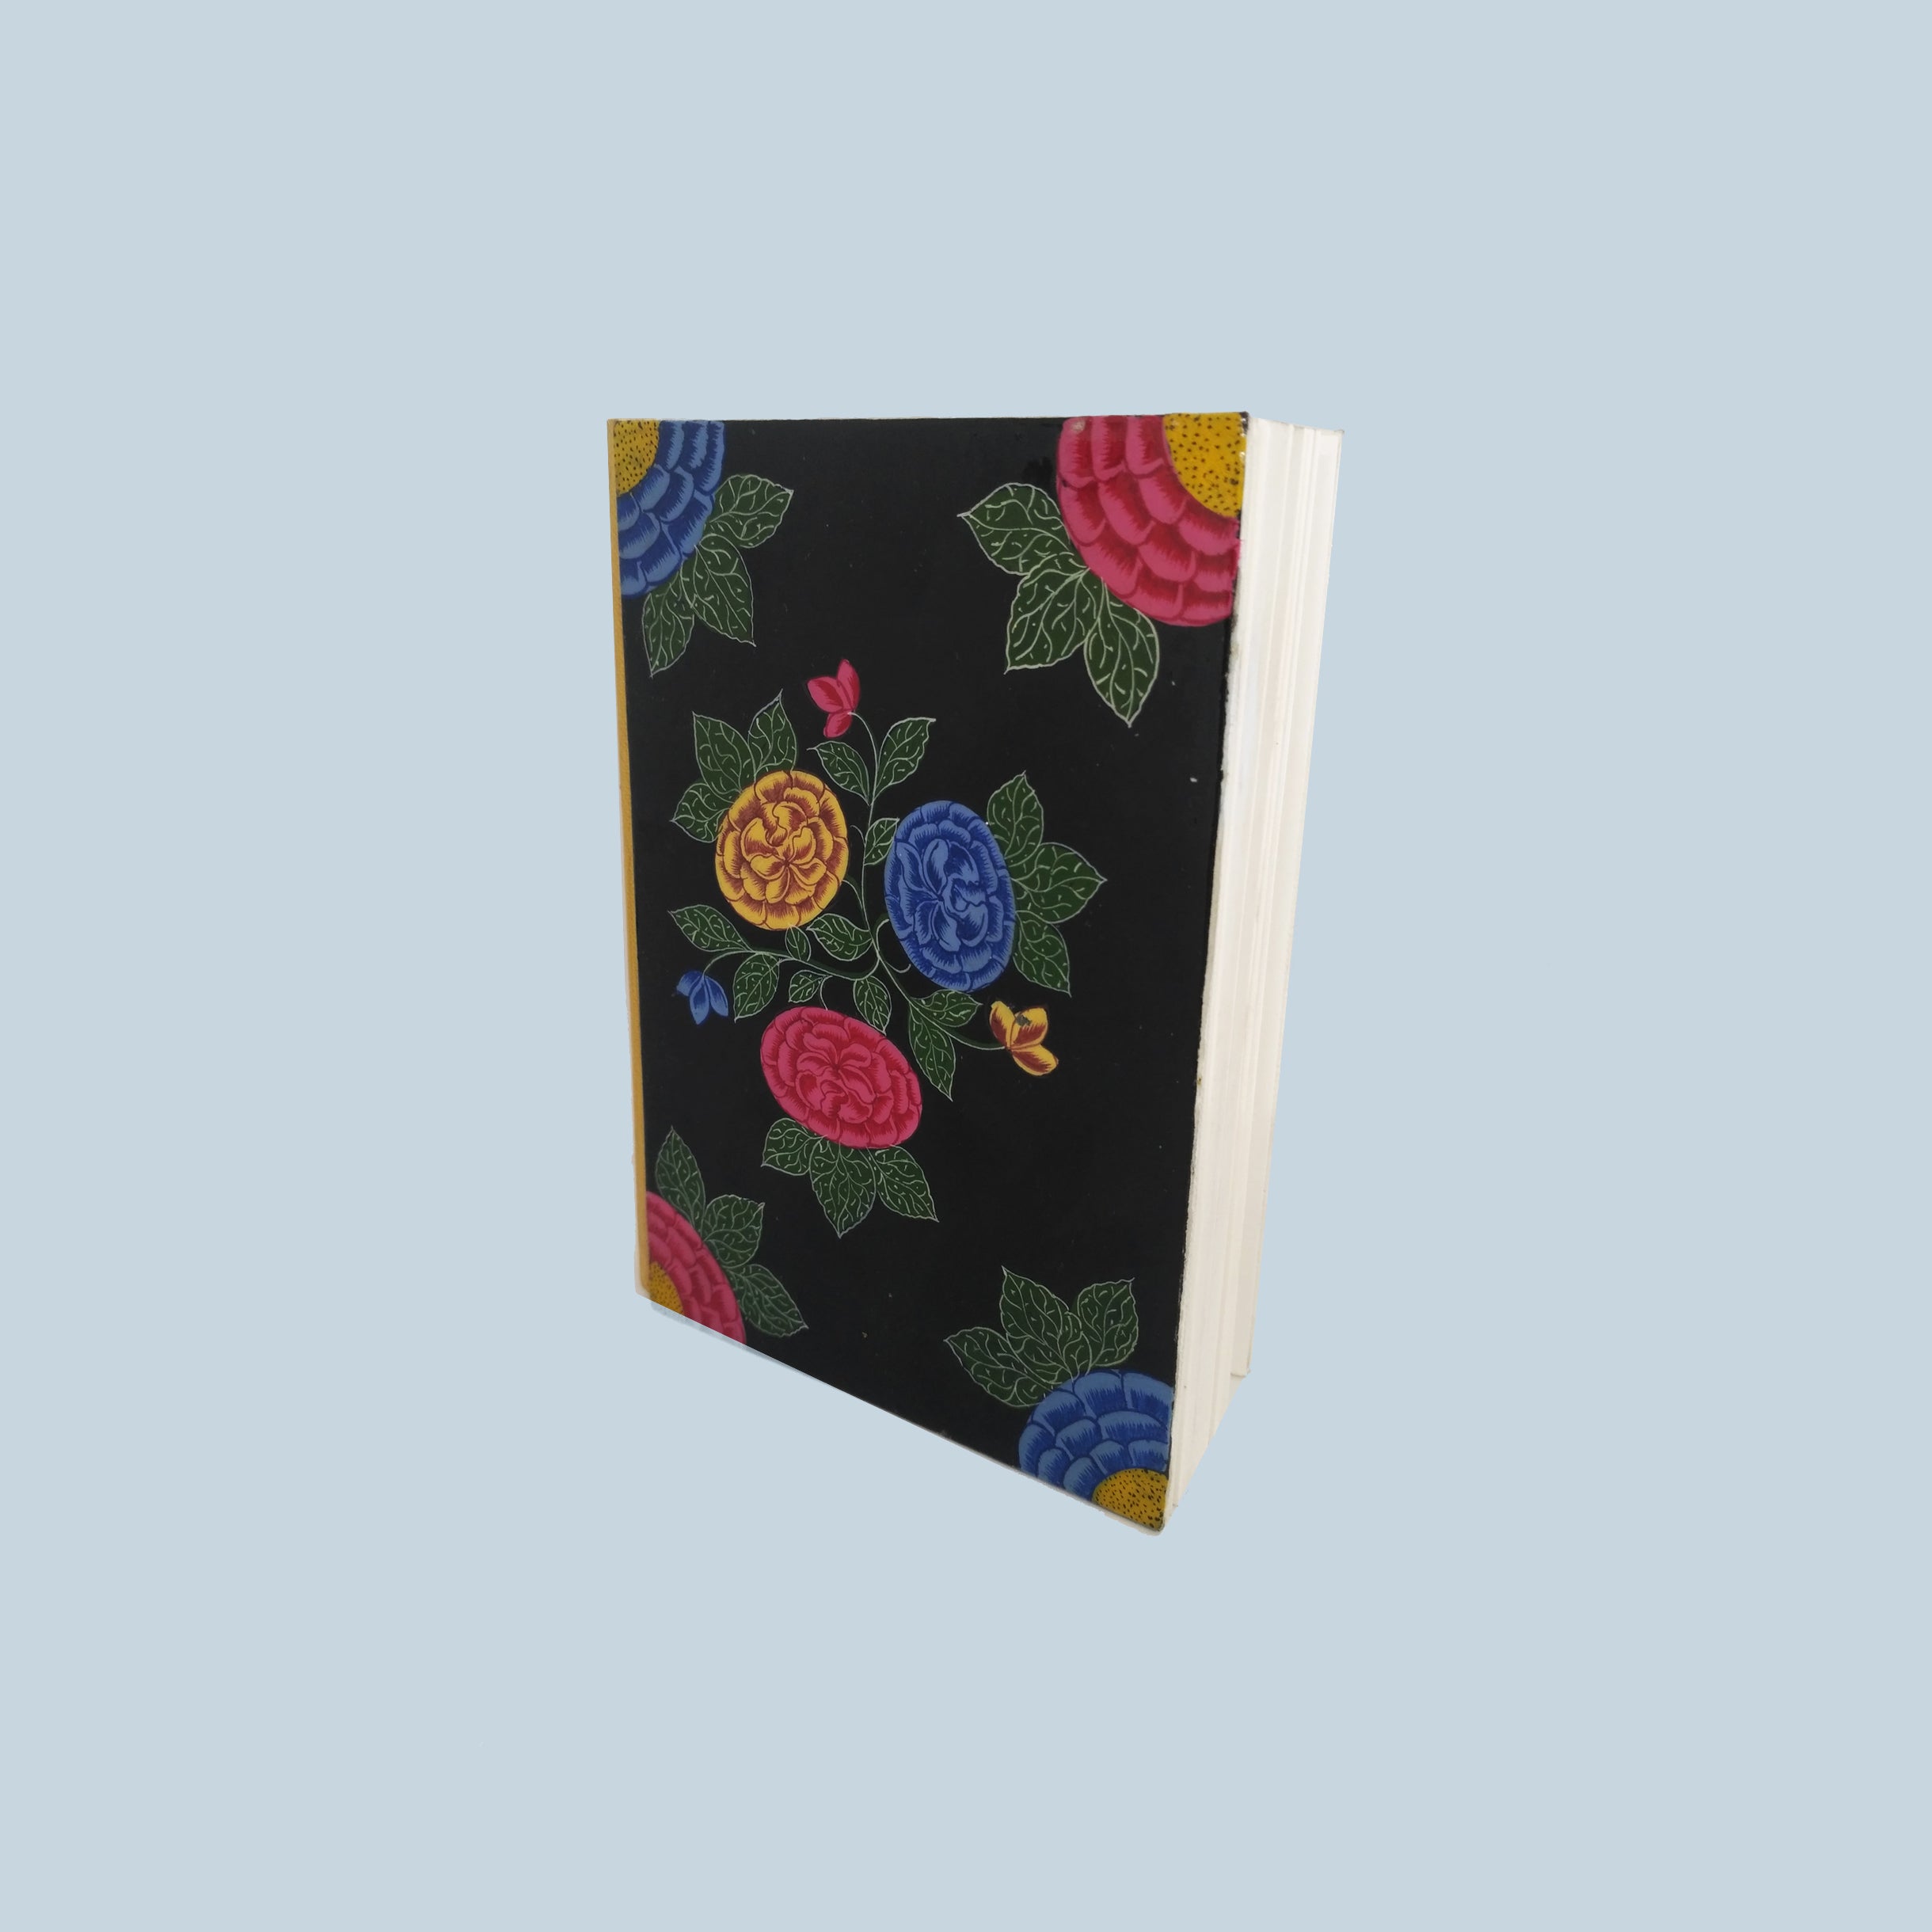 Goncha - Hand-Painted A6-size Notebook